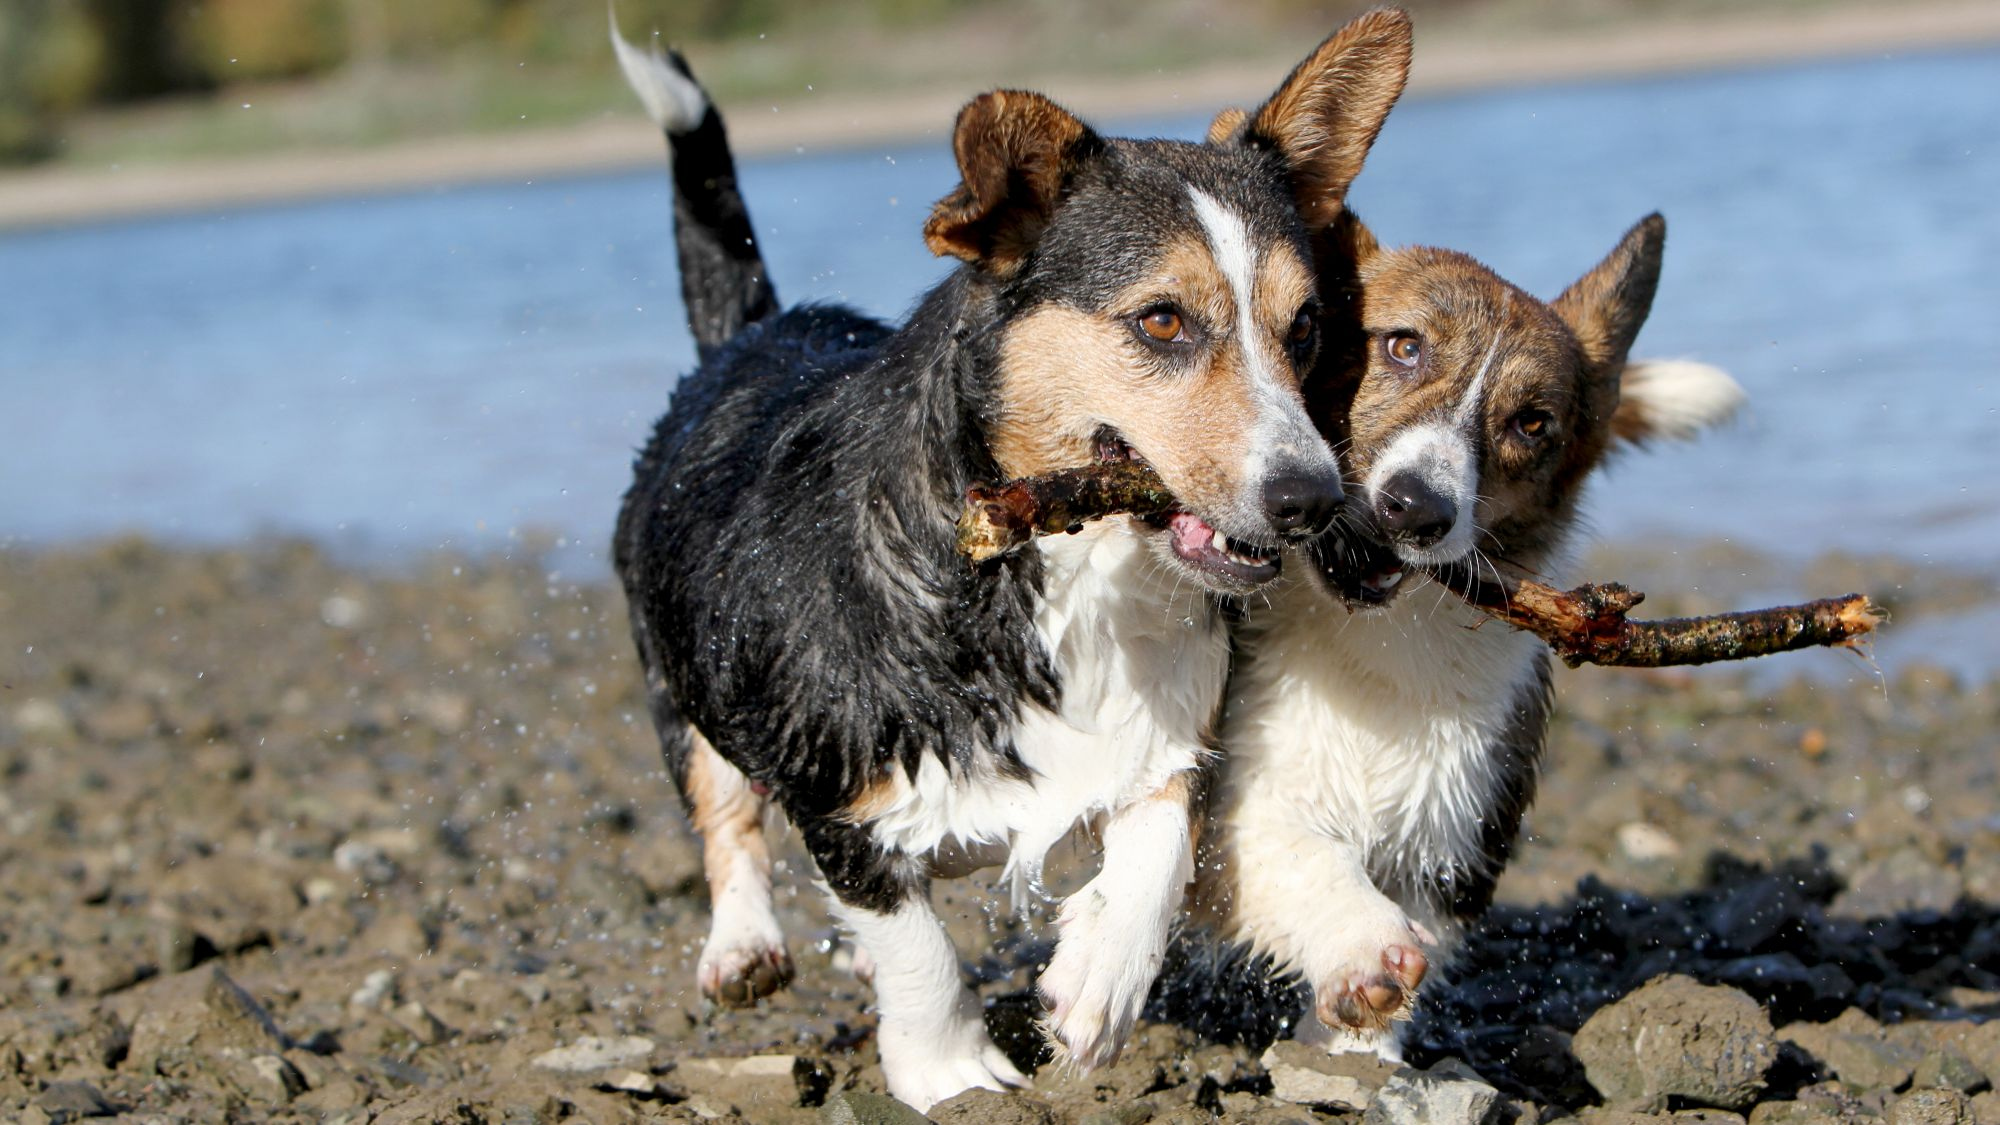 Two Cardigan Welsh Corgis side by side chewing on a stick